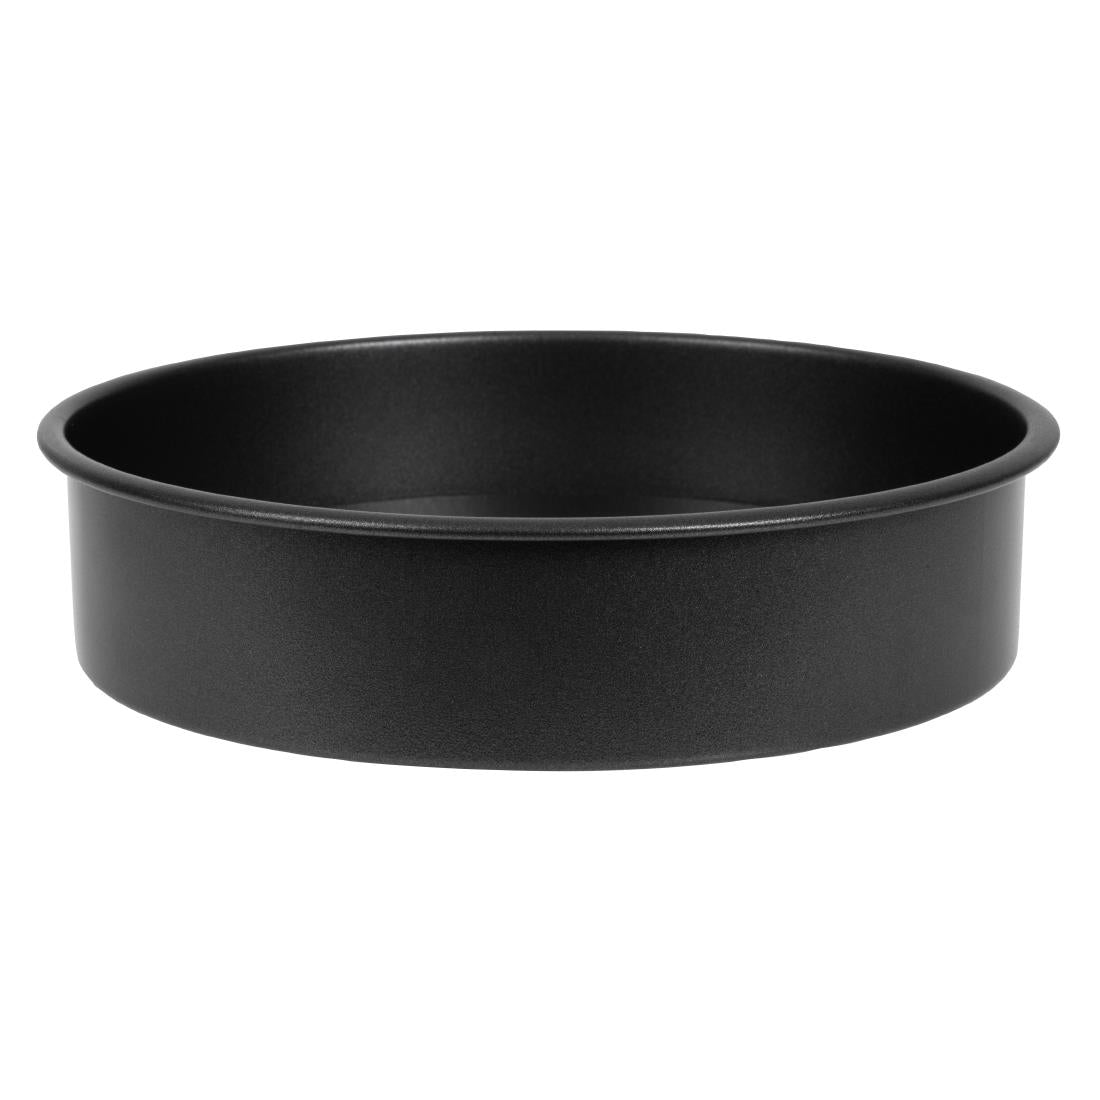 FC357 Masterclass Non-Stick Loose Base Round Sandwich Pan 180mm JD Catering Equipment Solutions Ltd